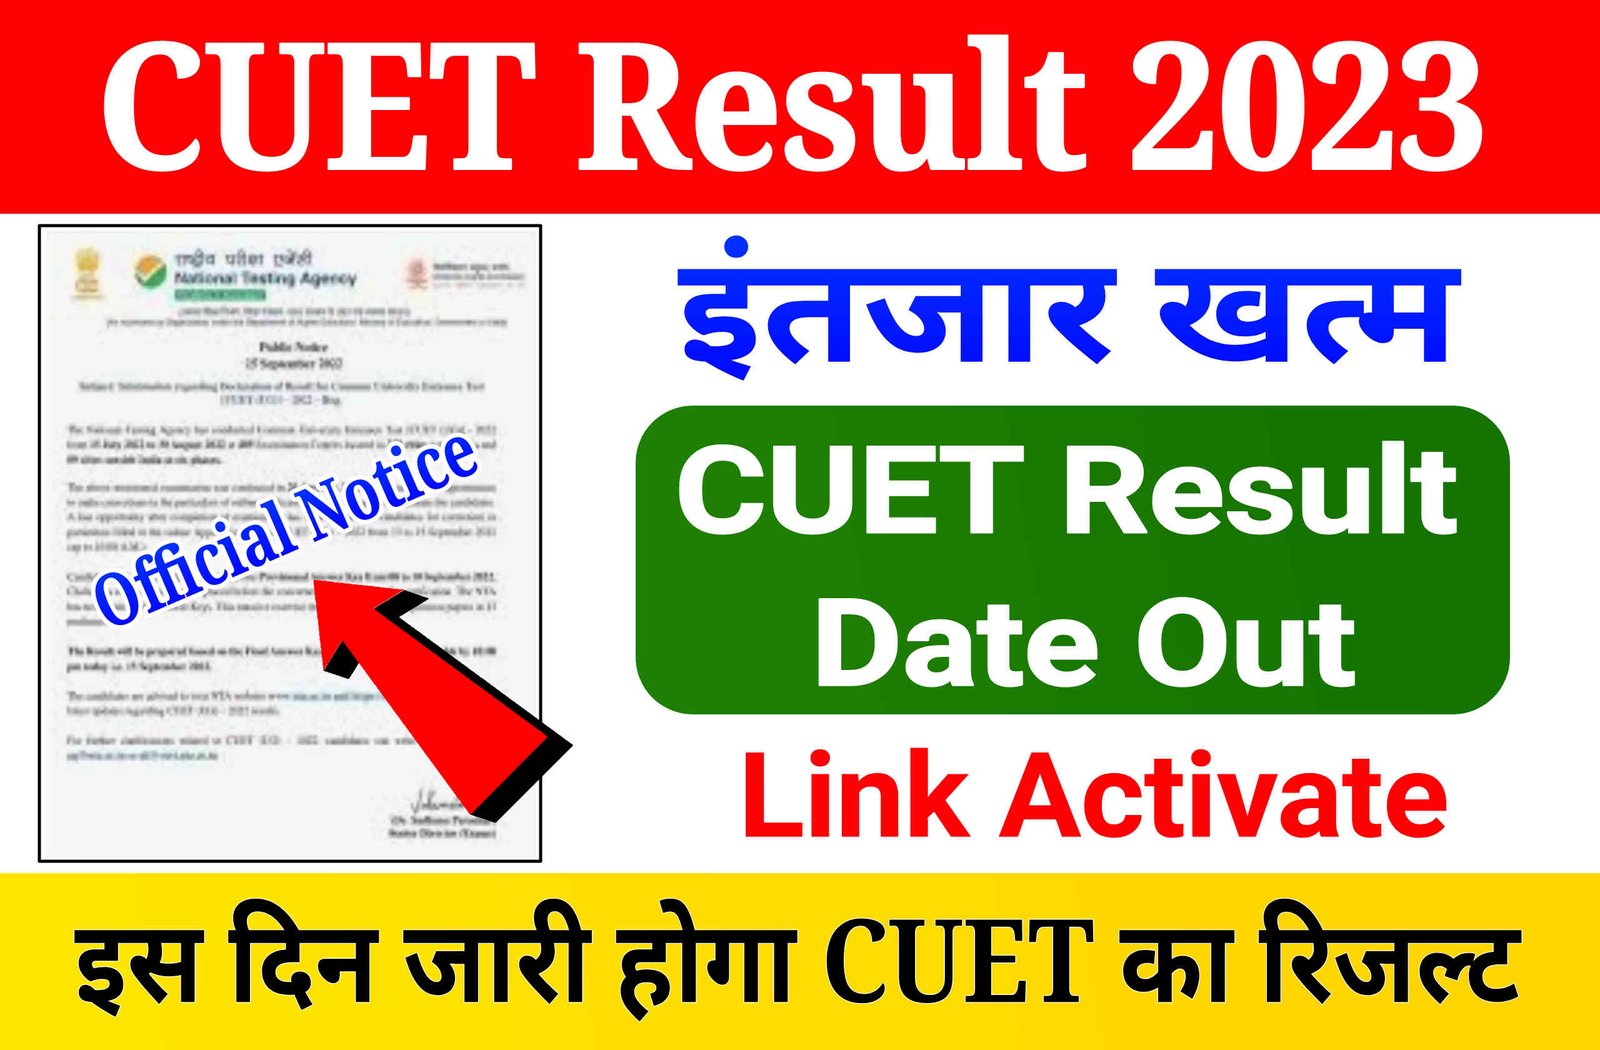 CUET Result Date 2023 Out: Direct Link to Check CUET Result 2023 and Download Scorecard, Link Activate